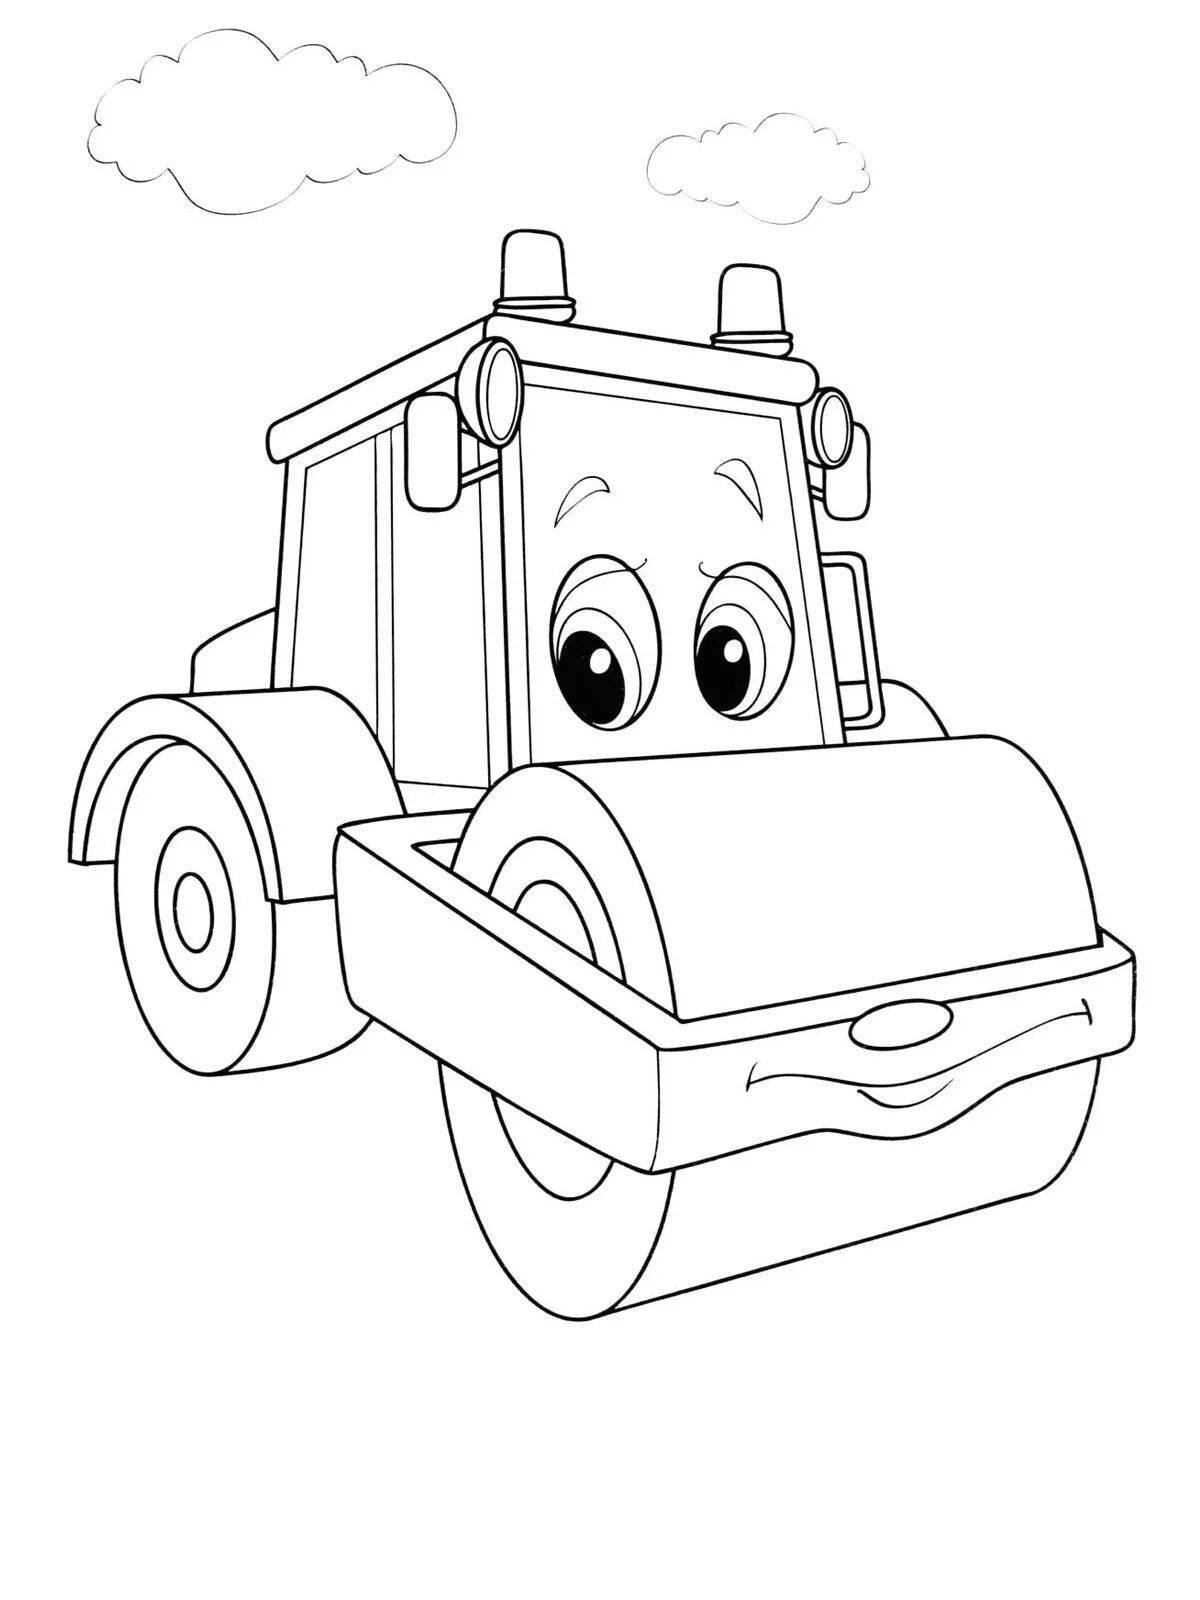 Coloring book wonderful left truck tractor